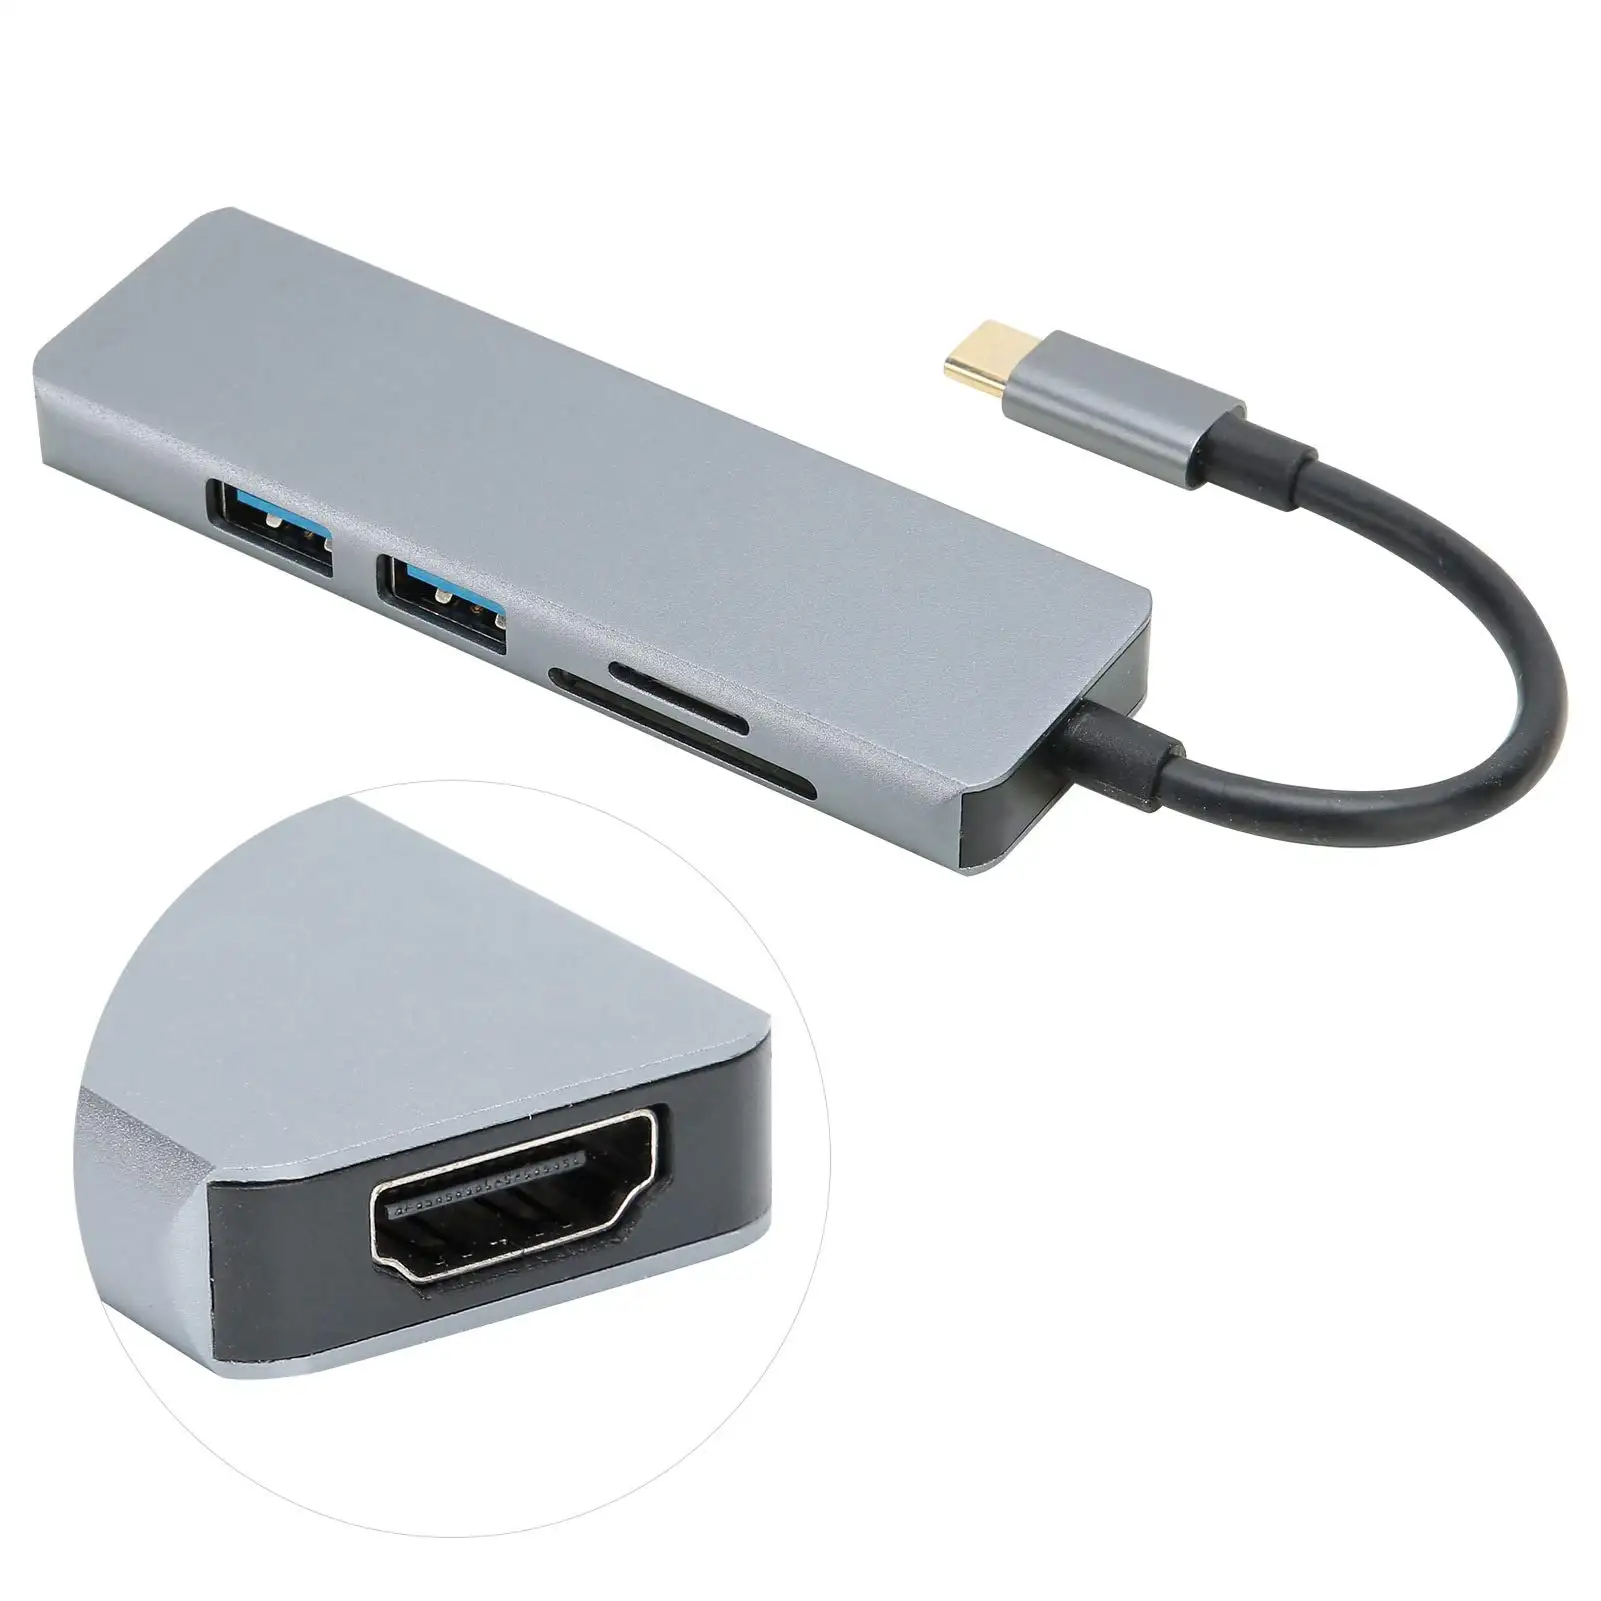 5-in-1 USB C Hub Multiport Adapter: HDMI 4K, USB 3.0&USB2.0 Ports TF SD Hub docking station For Computer Laptop, SY